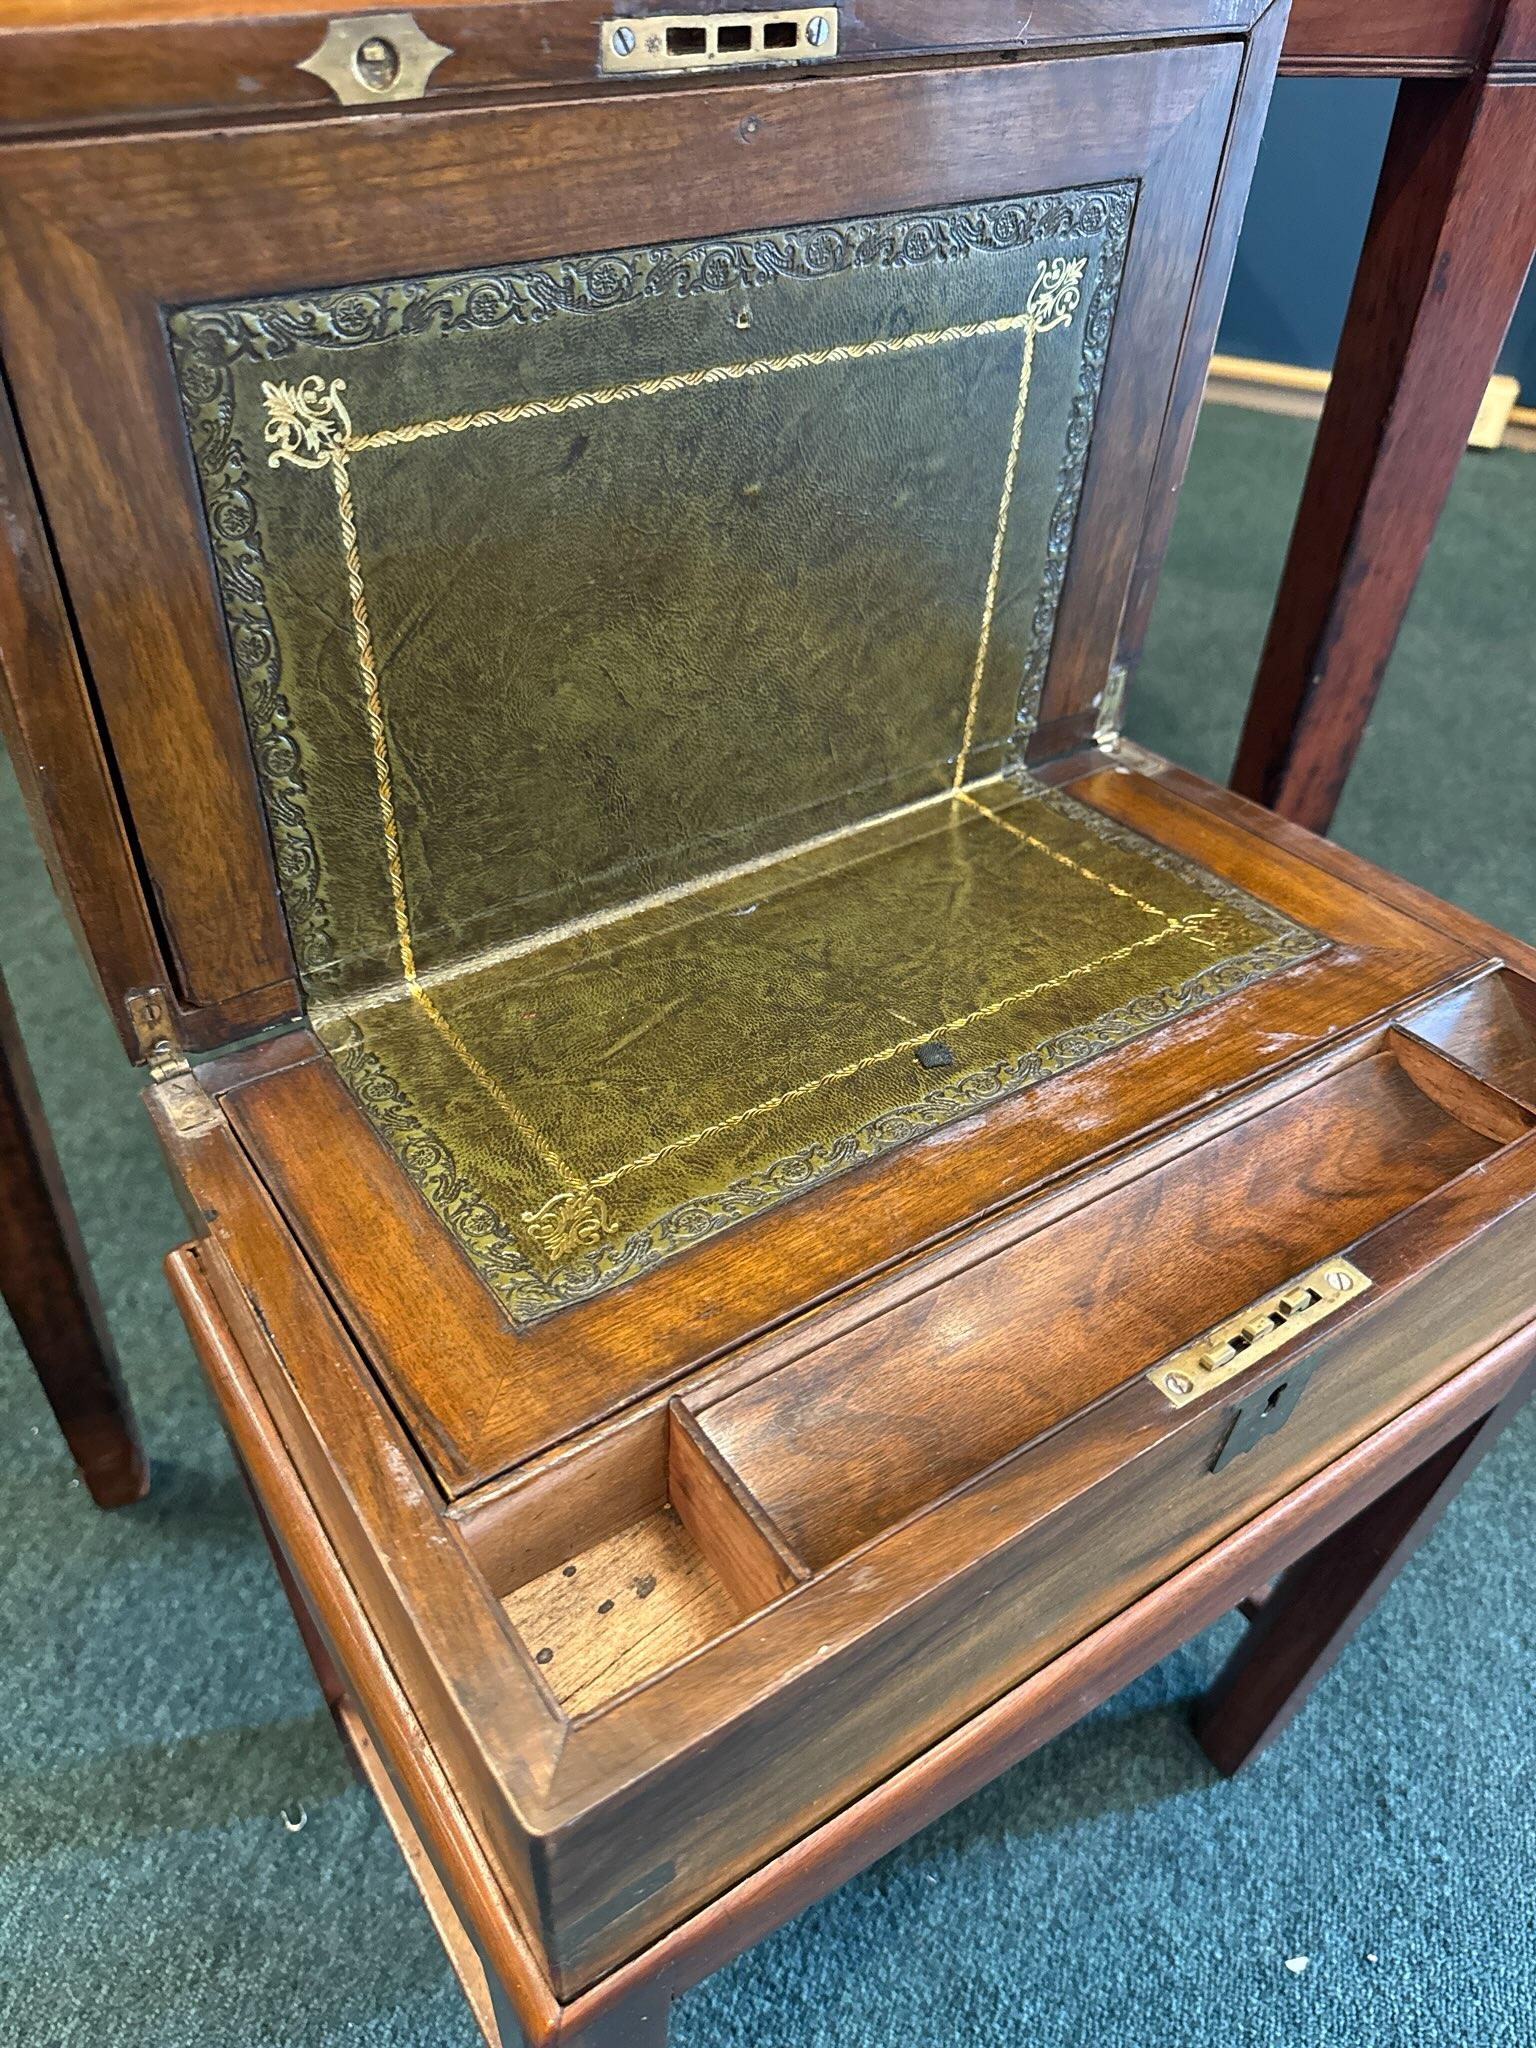 Early 19th Century English Lap Desk on Stand with Original Leather. England, circa 1800-1830. Measures: 20